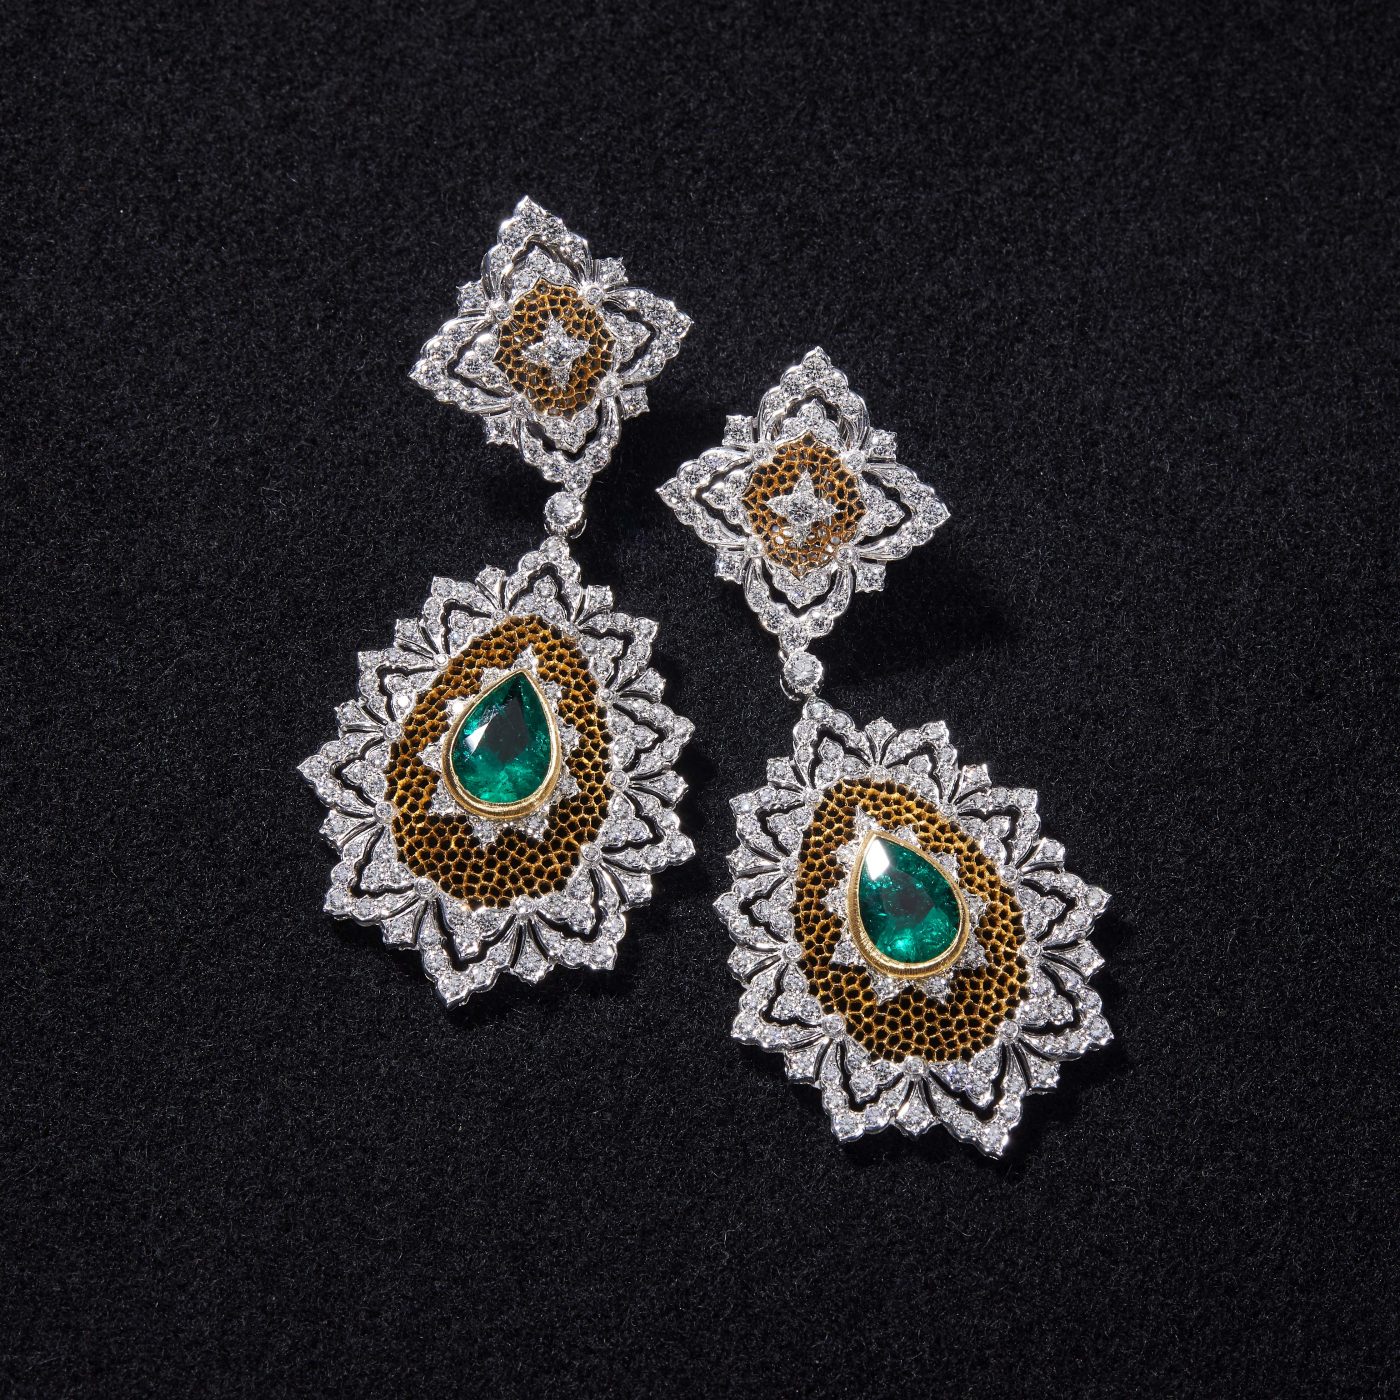 White- and yellow-gold honeycomb pendant earrings set with emeralds and diamonds.